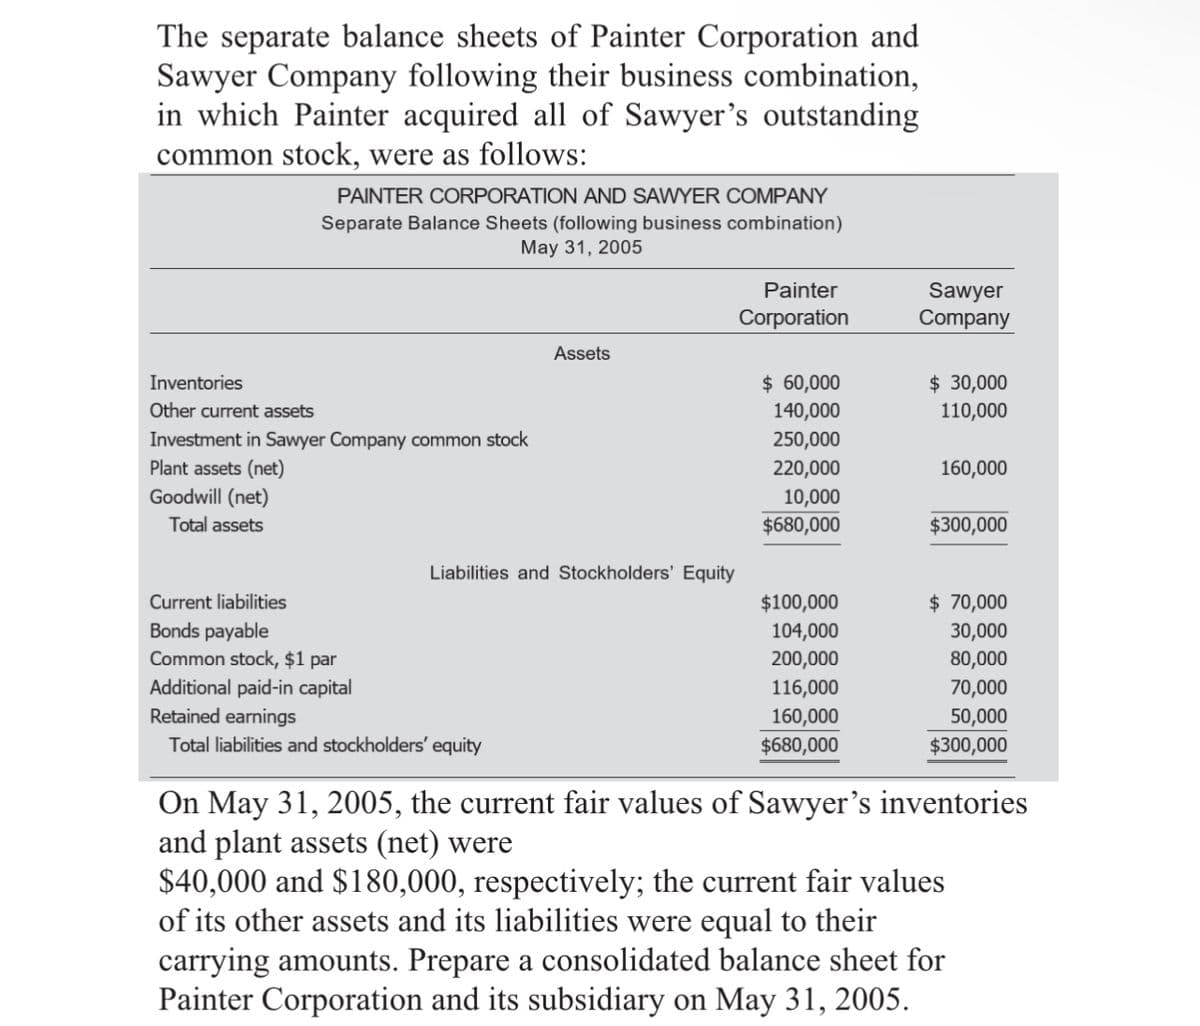 The separate balance sheets of Painter Corporation and
Sawyer Company following their business combination,
in which Painter acquired all of Sawyer's outstanding
common stock, were as follows:
PAINTER CORPORATION AND SAWYER COMPANY
Separate Balance Sheets (following business combination)
May 31, 2005
Painter
Corporation
Sawyer
Company
Assets
Inventories
$ 60,000
Other current assets
Investment in Sawyer Company common stock
Plant assets (net)
Goodwill (net)
140,000
$ 30,000
110,000
250,000
220,000
160,000
10,000
Total assets
$680,000
$300,000
Liabilities and Stockholders' Equity
Current liabilities
$100,000
$ 70,000
Bonds payable
Common stock, $1 par
Additional paid-in capital
Retained earnings
Total liabilities and stockholders' equity
104,000
30,000
200,000
80,000
116,000
70,000
160,000
50,000
$680,000
$300,000
On May 31, 2005, the current fair values of Sawyer's inventories
and plant assets (net) were
$40,000 and $180,000, respectively; the current fair values
of its other assets and its liabilities were equal to their
carrying amounts. Prepare a consolidated balance sheet for
Painter Corporation and its subsidiary on May 31, 2005.